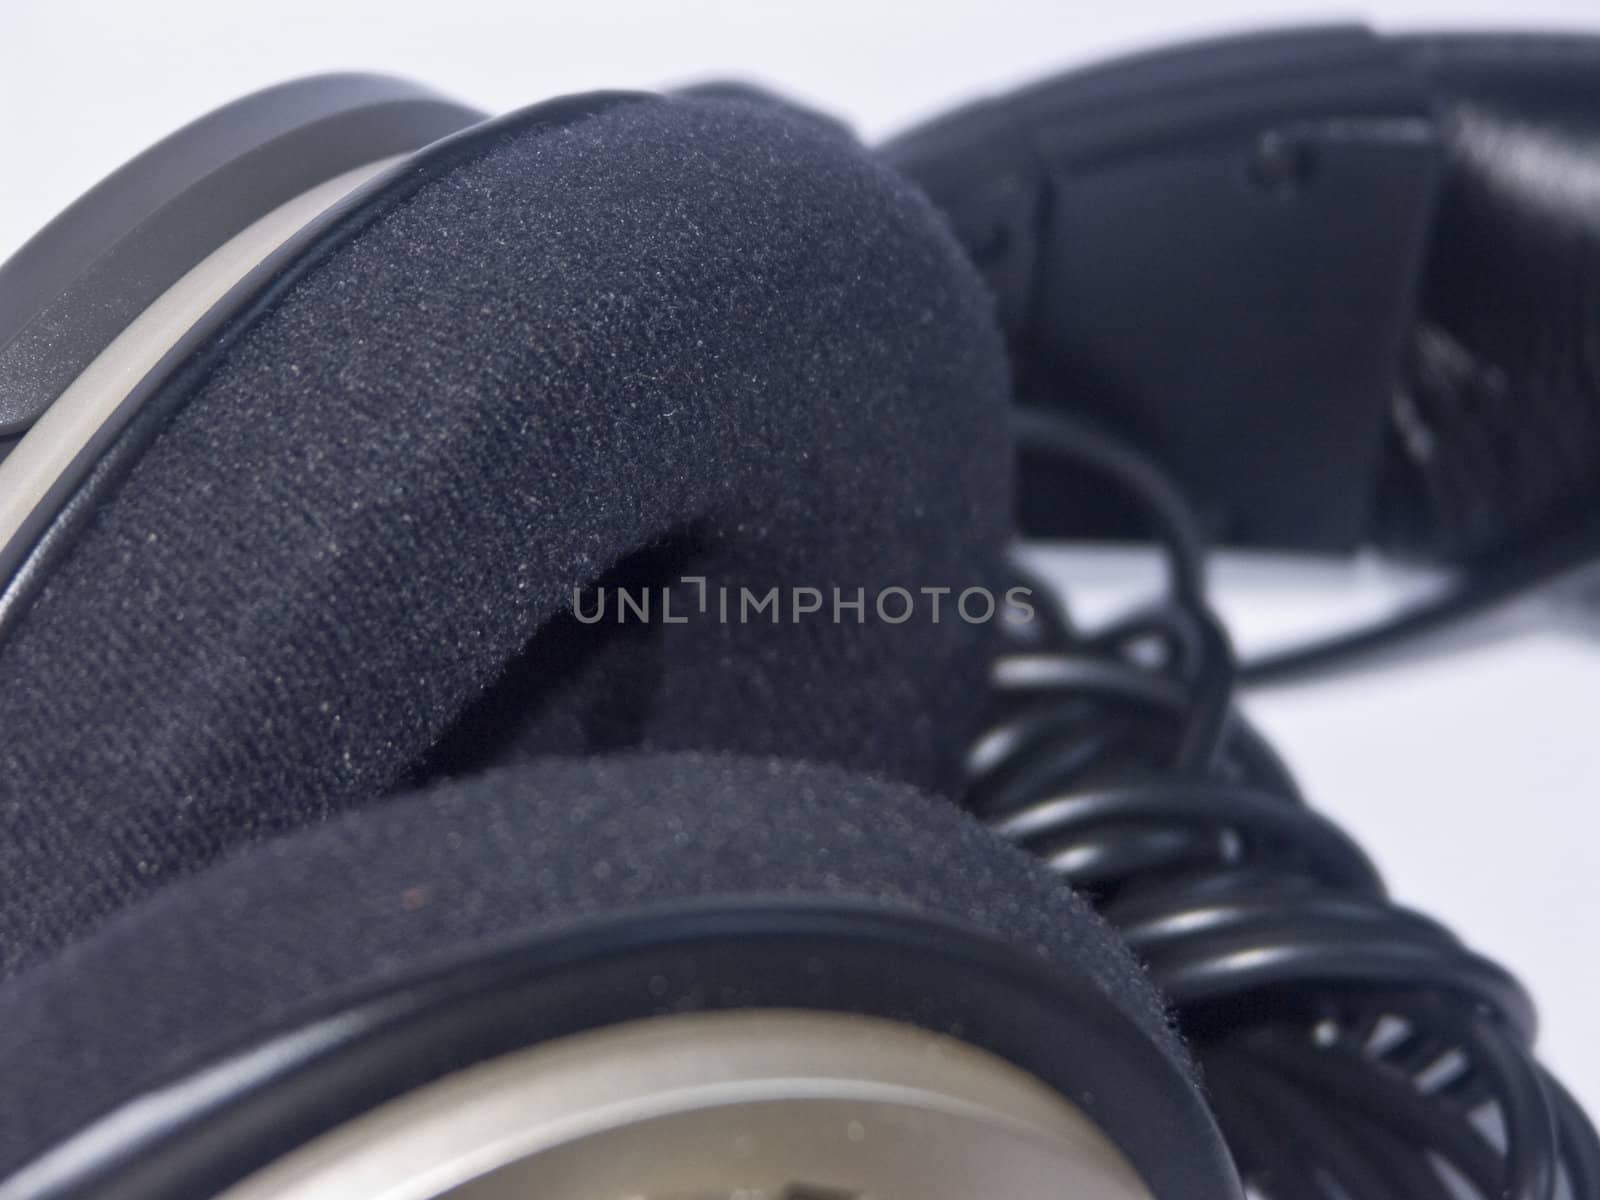 The image of a part of headphones largly